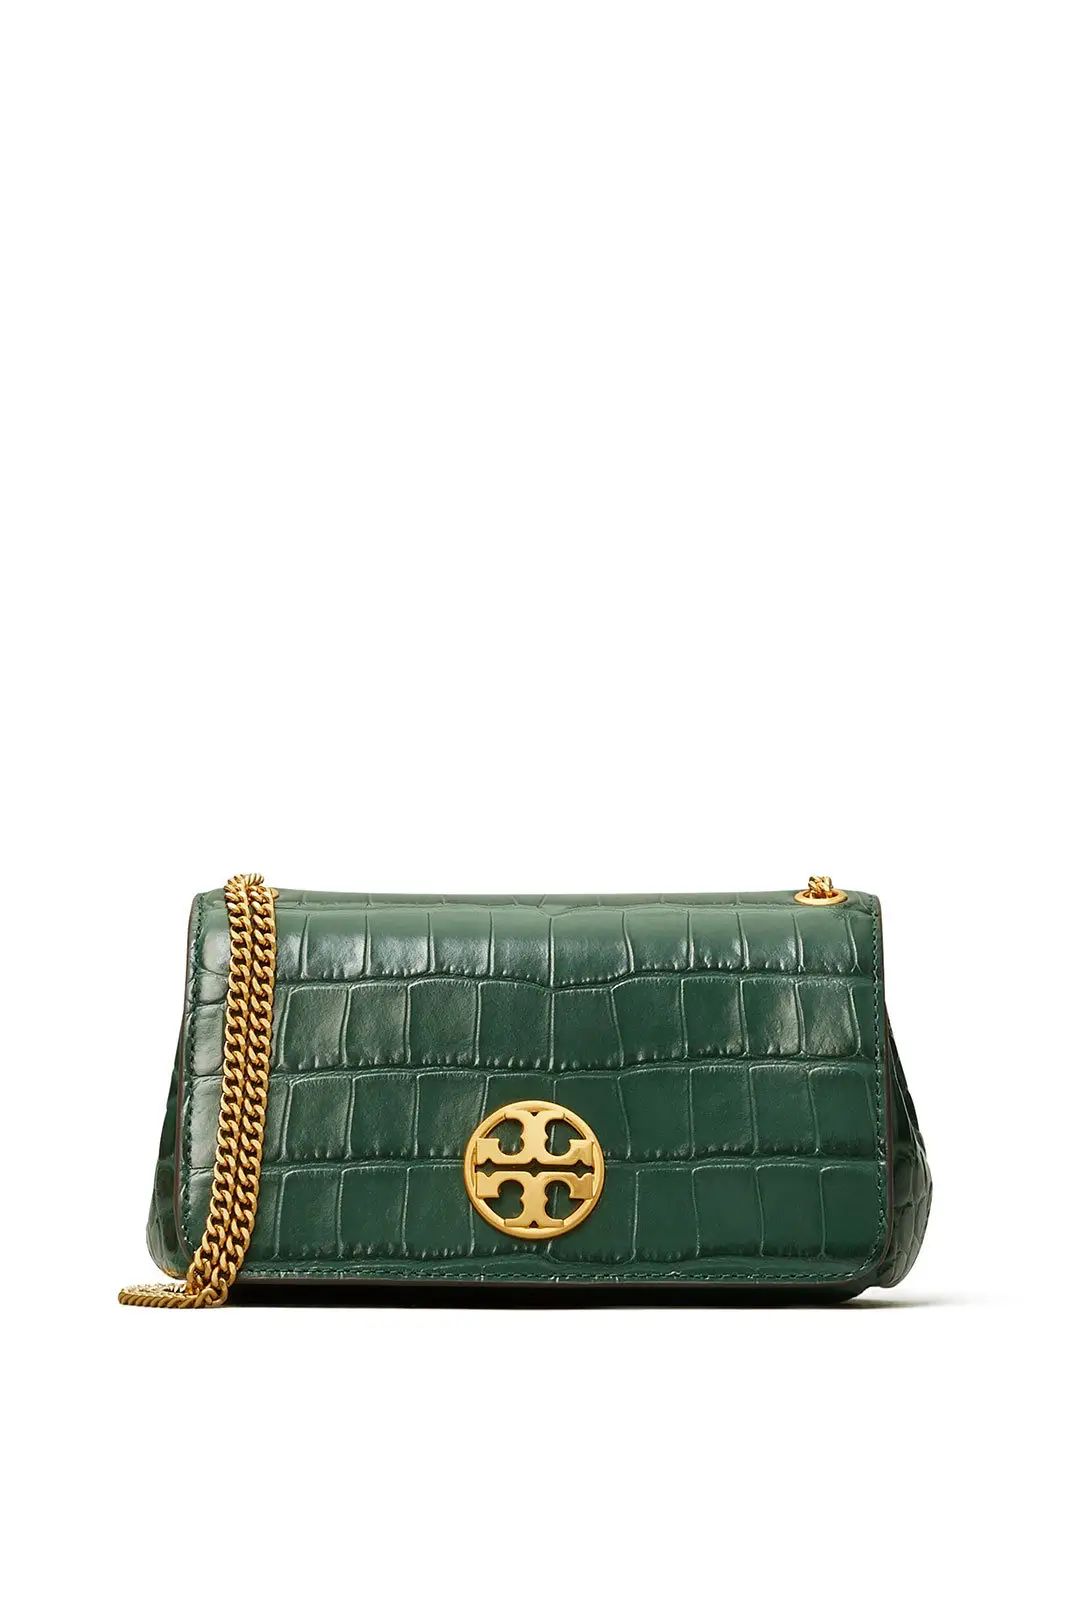 Tory Burch Accessories Norwood Chelsea Embossed Evening Bag | Rent The Runway